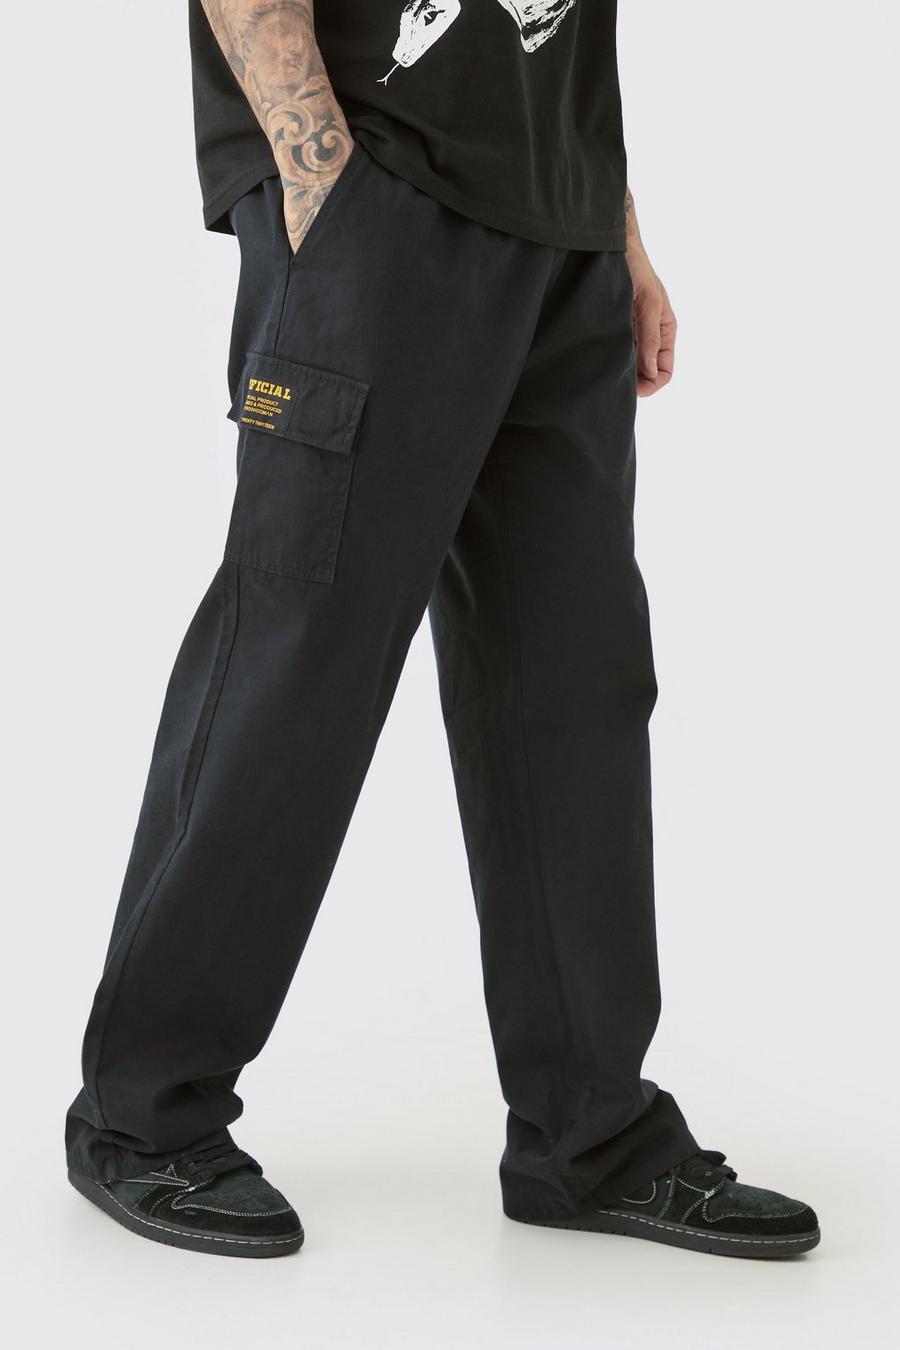 Black Tall Elastic Waist Twill Relaxed Fit Cargo Tab Trouser